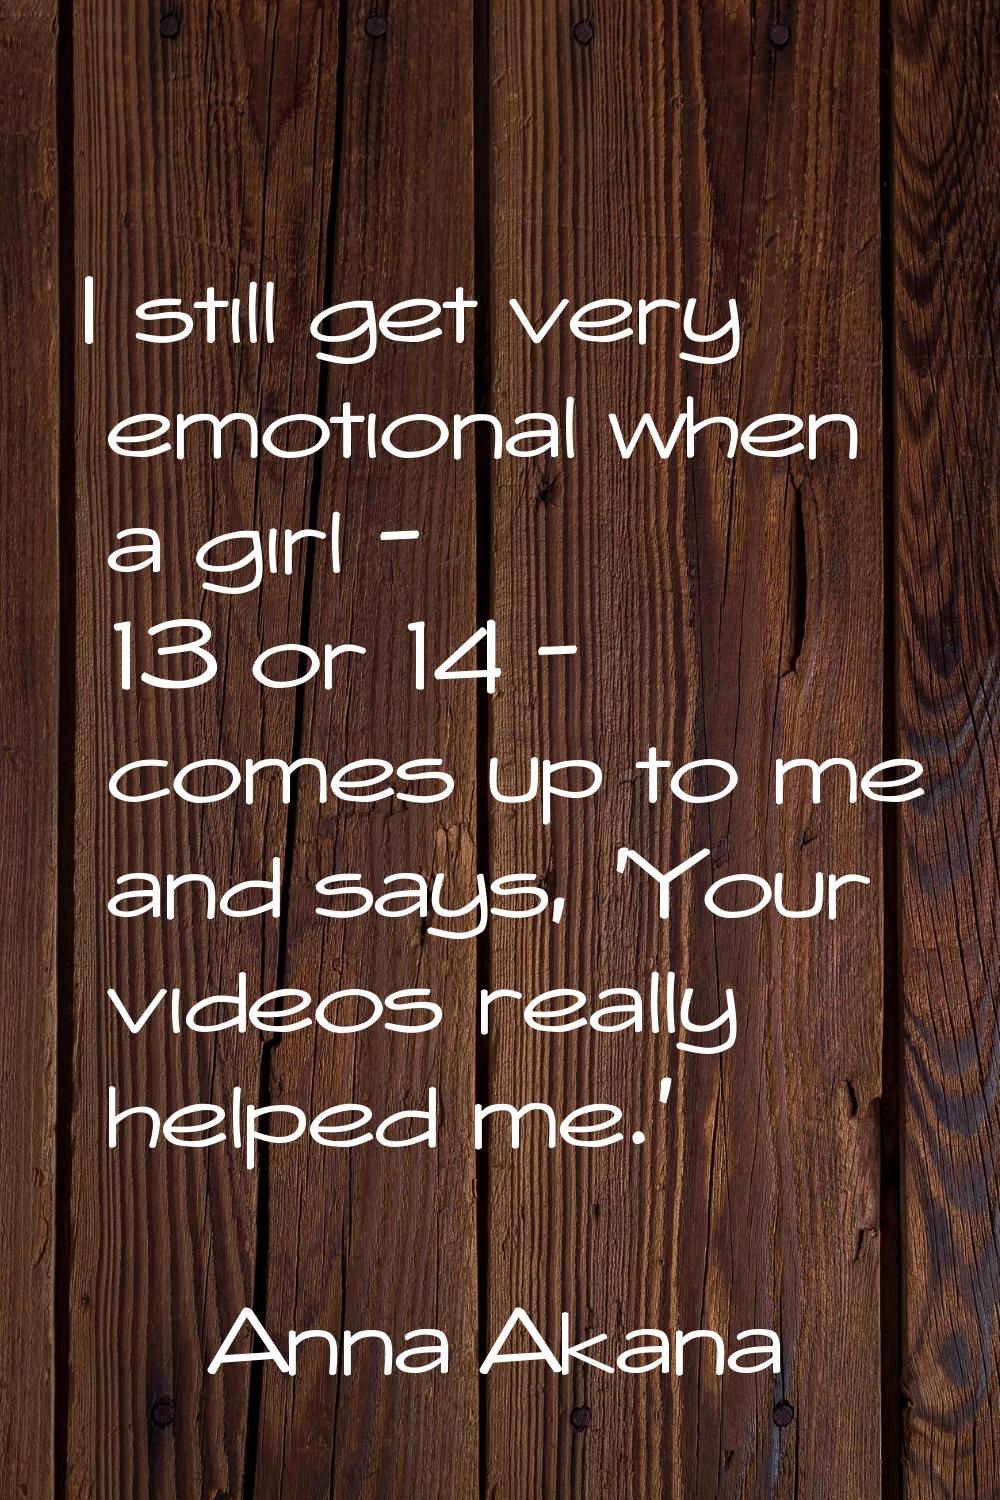 I still get very emotional when a girl - 13 or 14 - comes up to me and says, 'Your videos really he